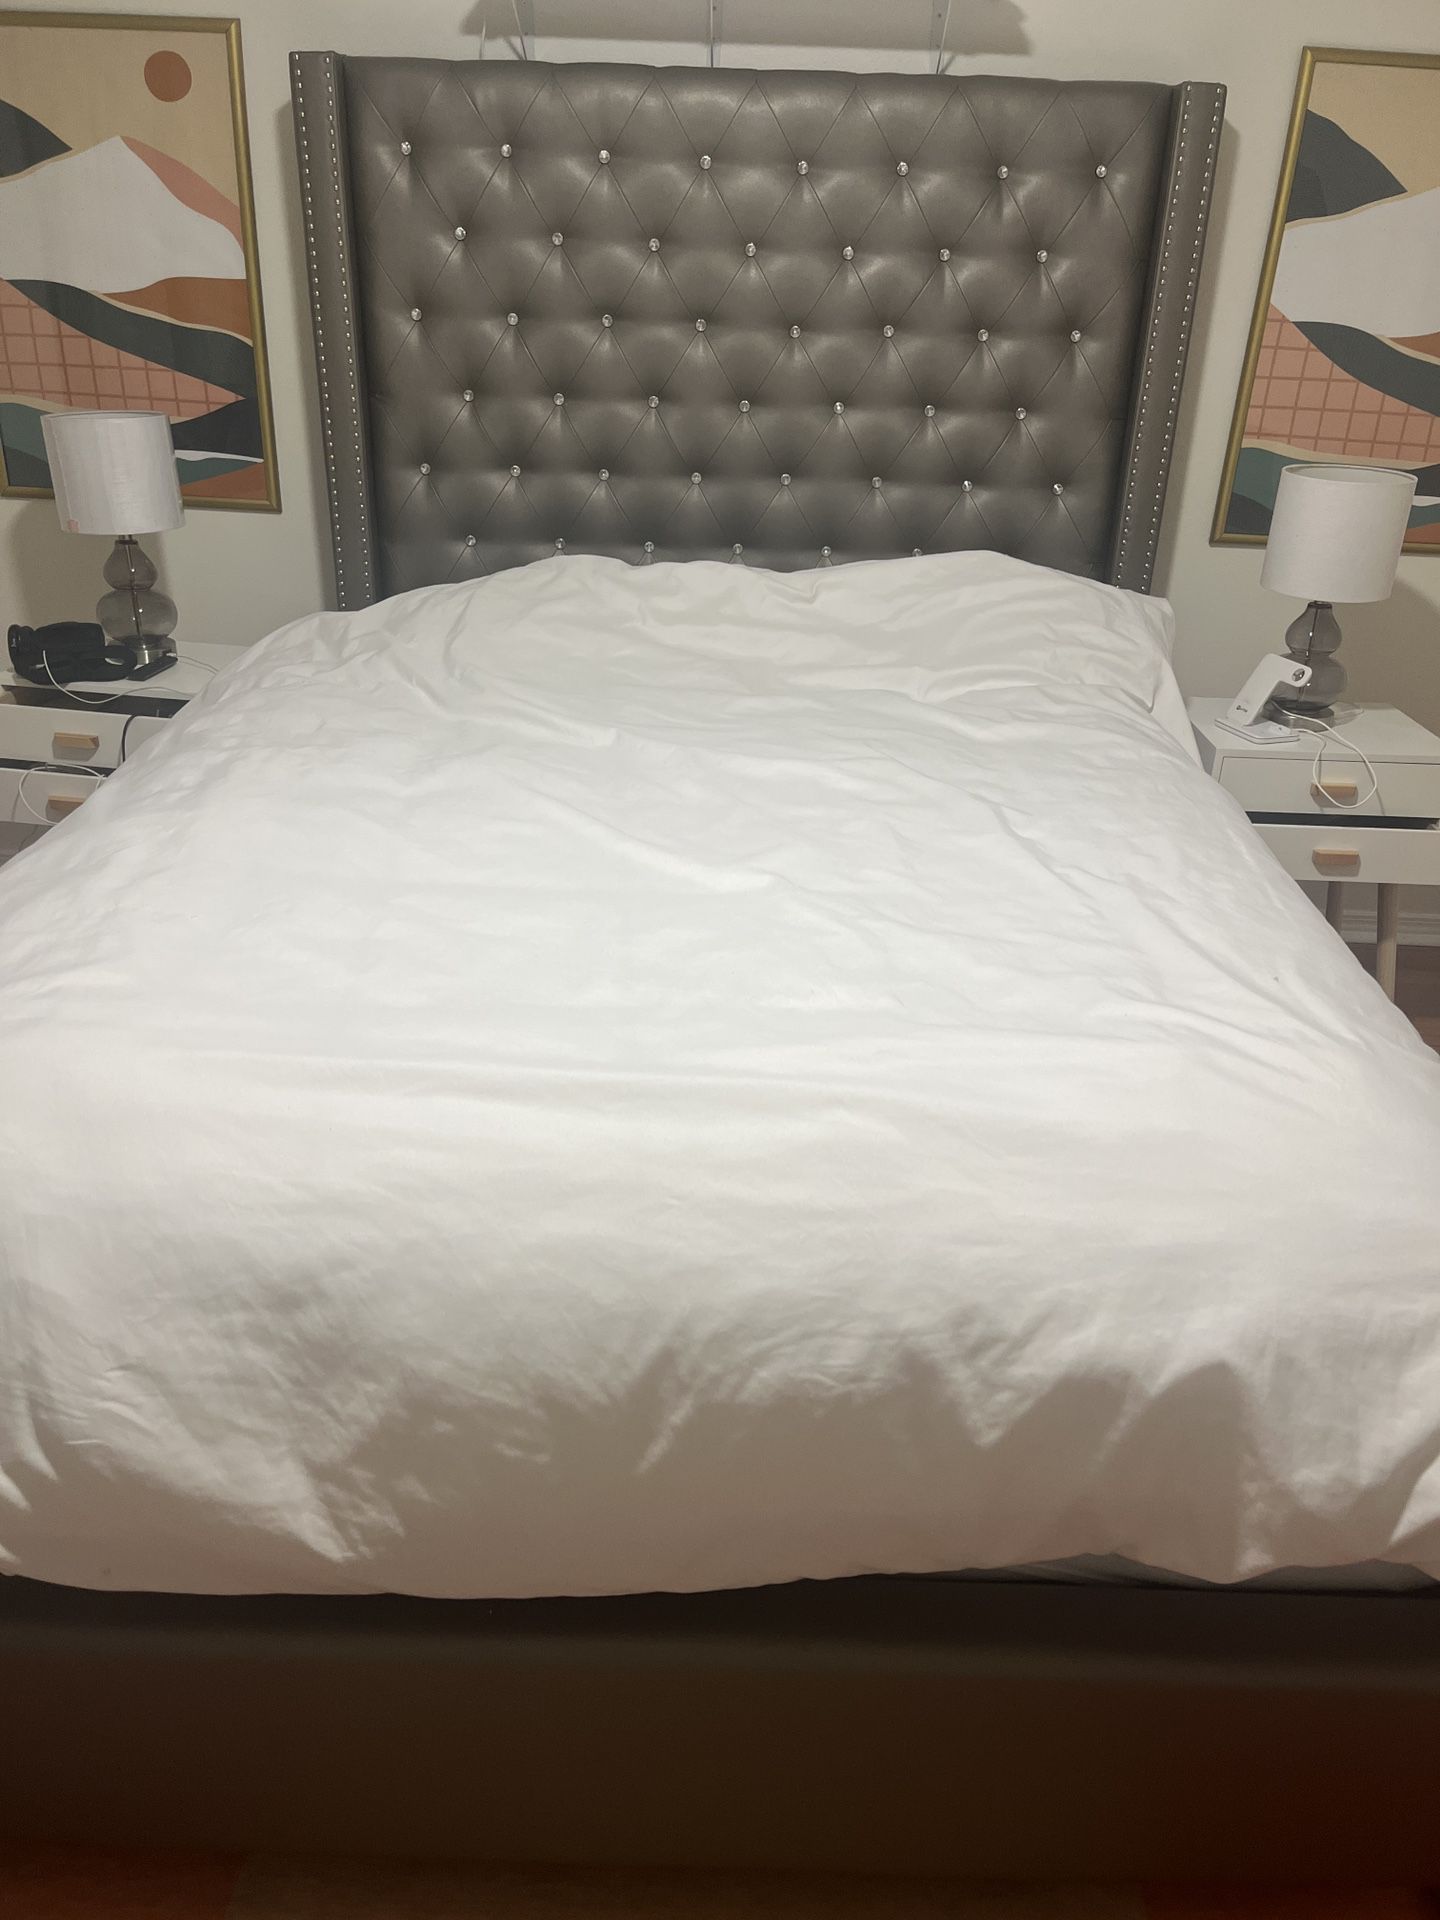 Queen Silver Tufted Upholstered with Jewels Bed Frame and Headboard 